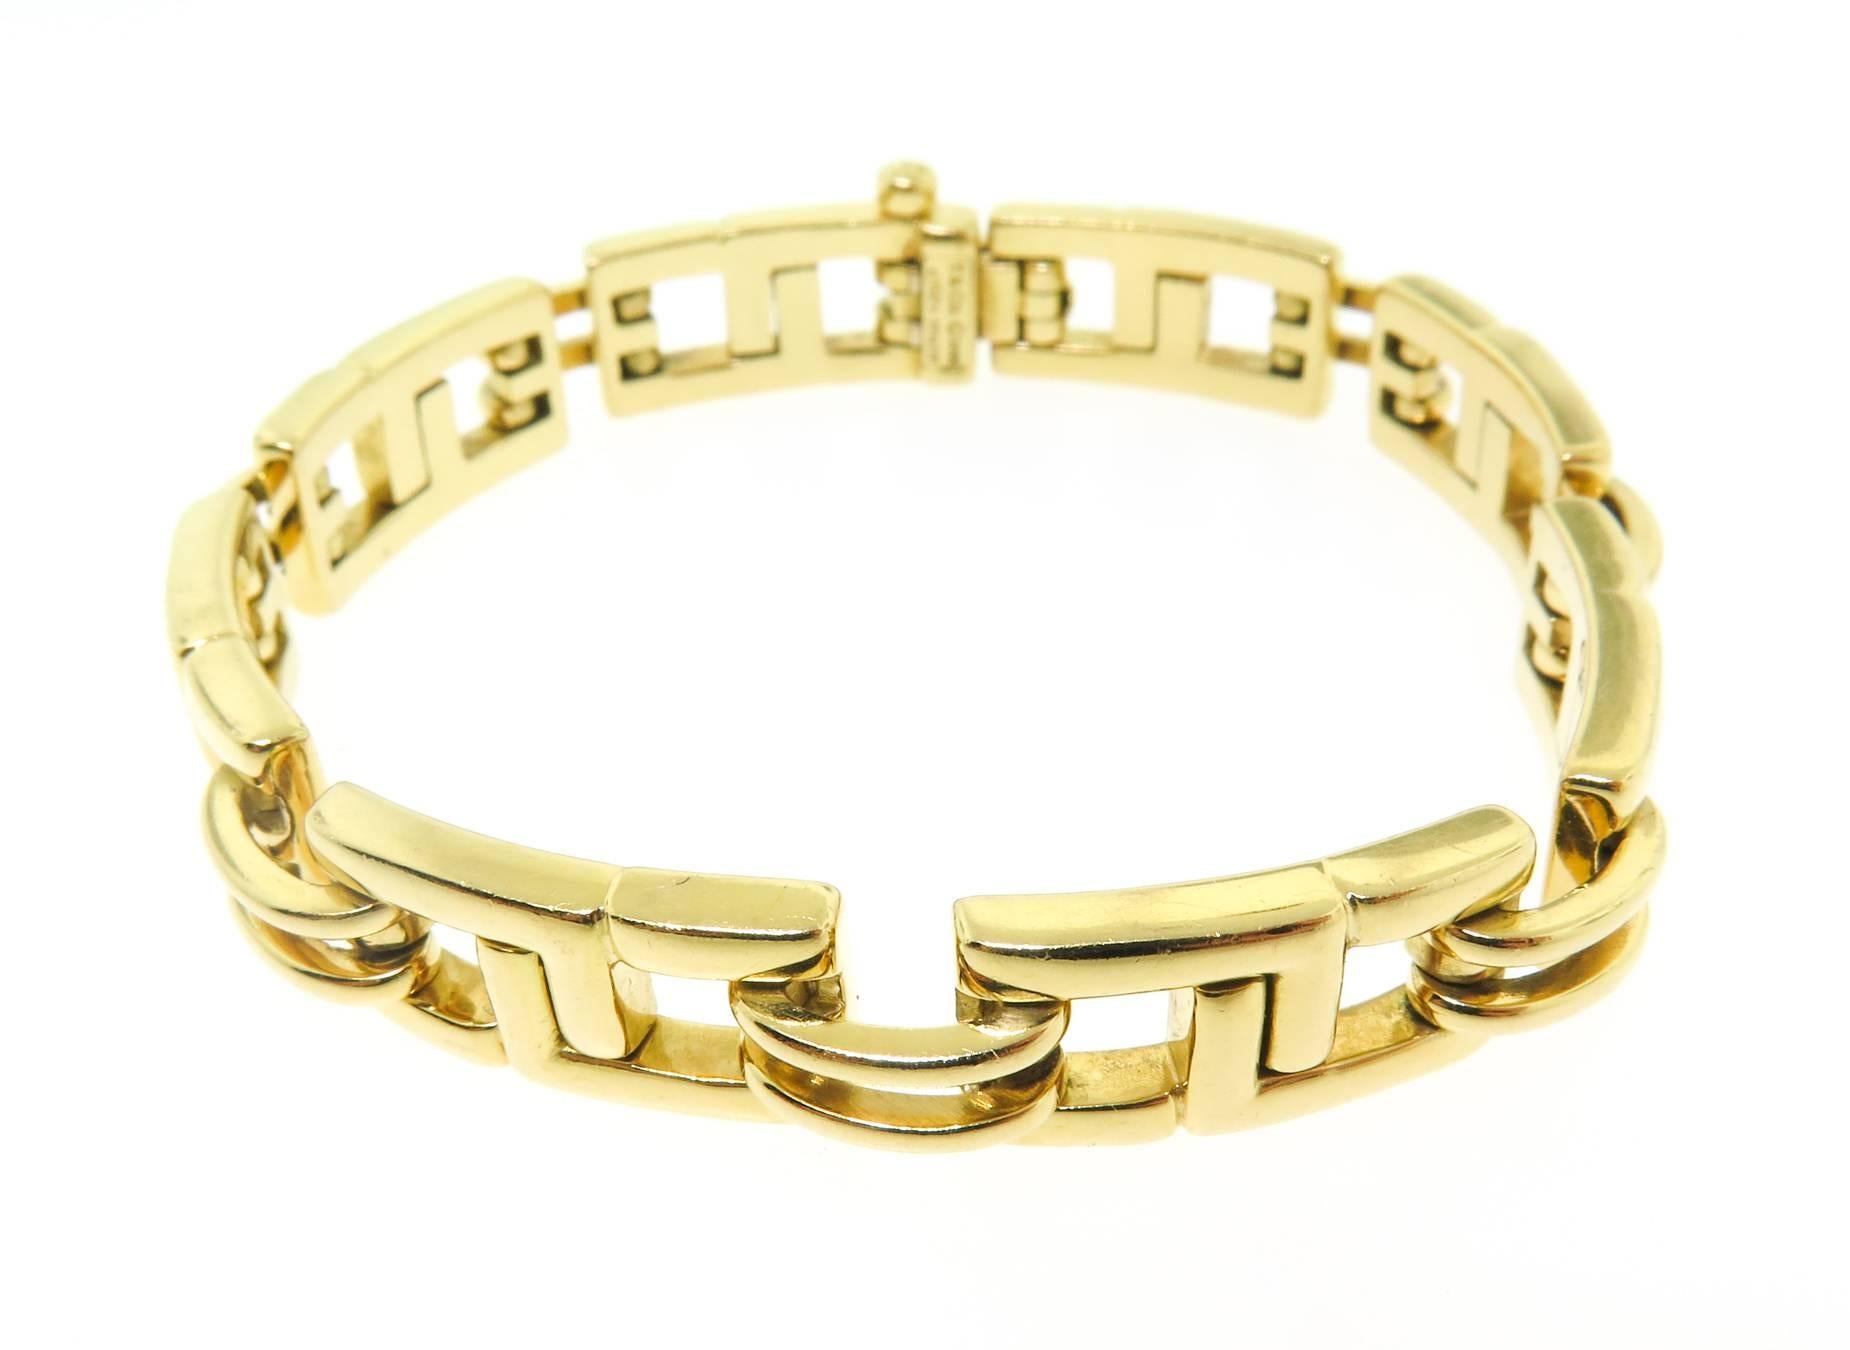 This stylish bracelet is made of 18kt yellow gold links and has a very substantial look and feel. Each open link has a smooth surface design. Chunky bar hinges connect each link together, making the bracelet flexible and comfortable to wear. The